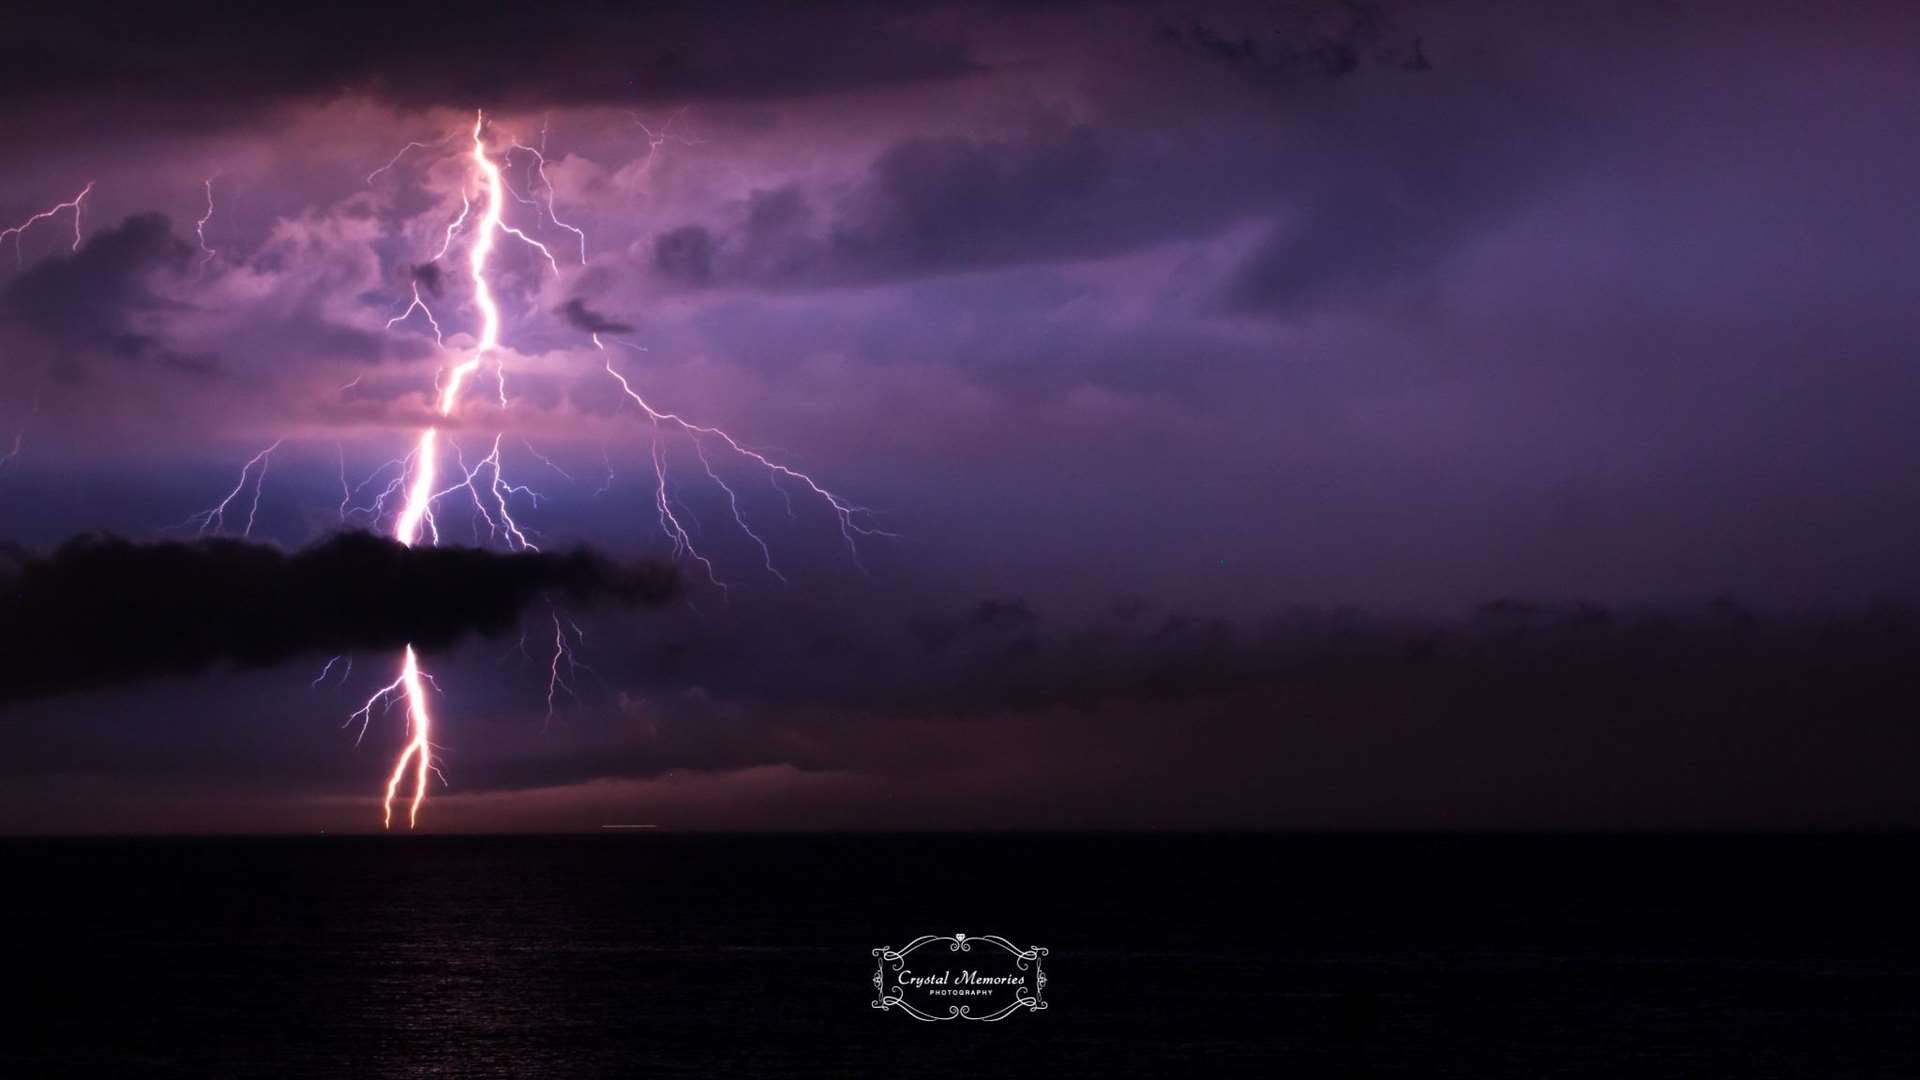 Storm pictures were taken last night at the North End of Deal. Pictures David Christie of Crystal Memories